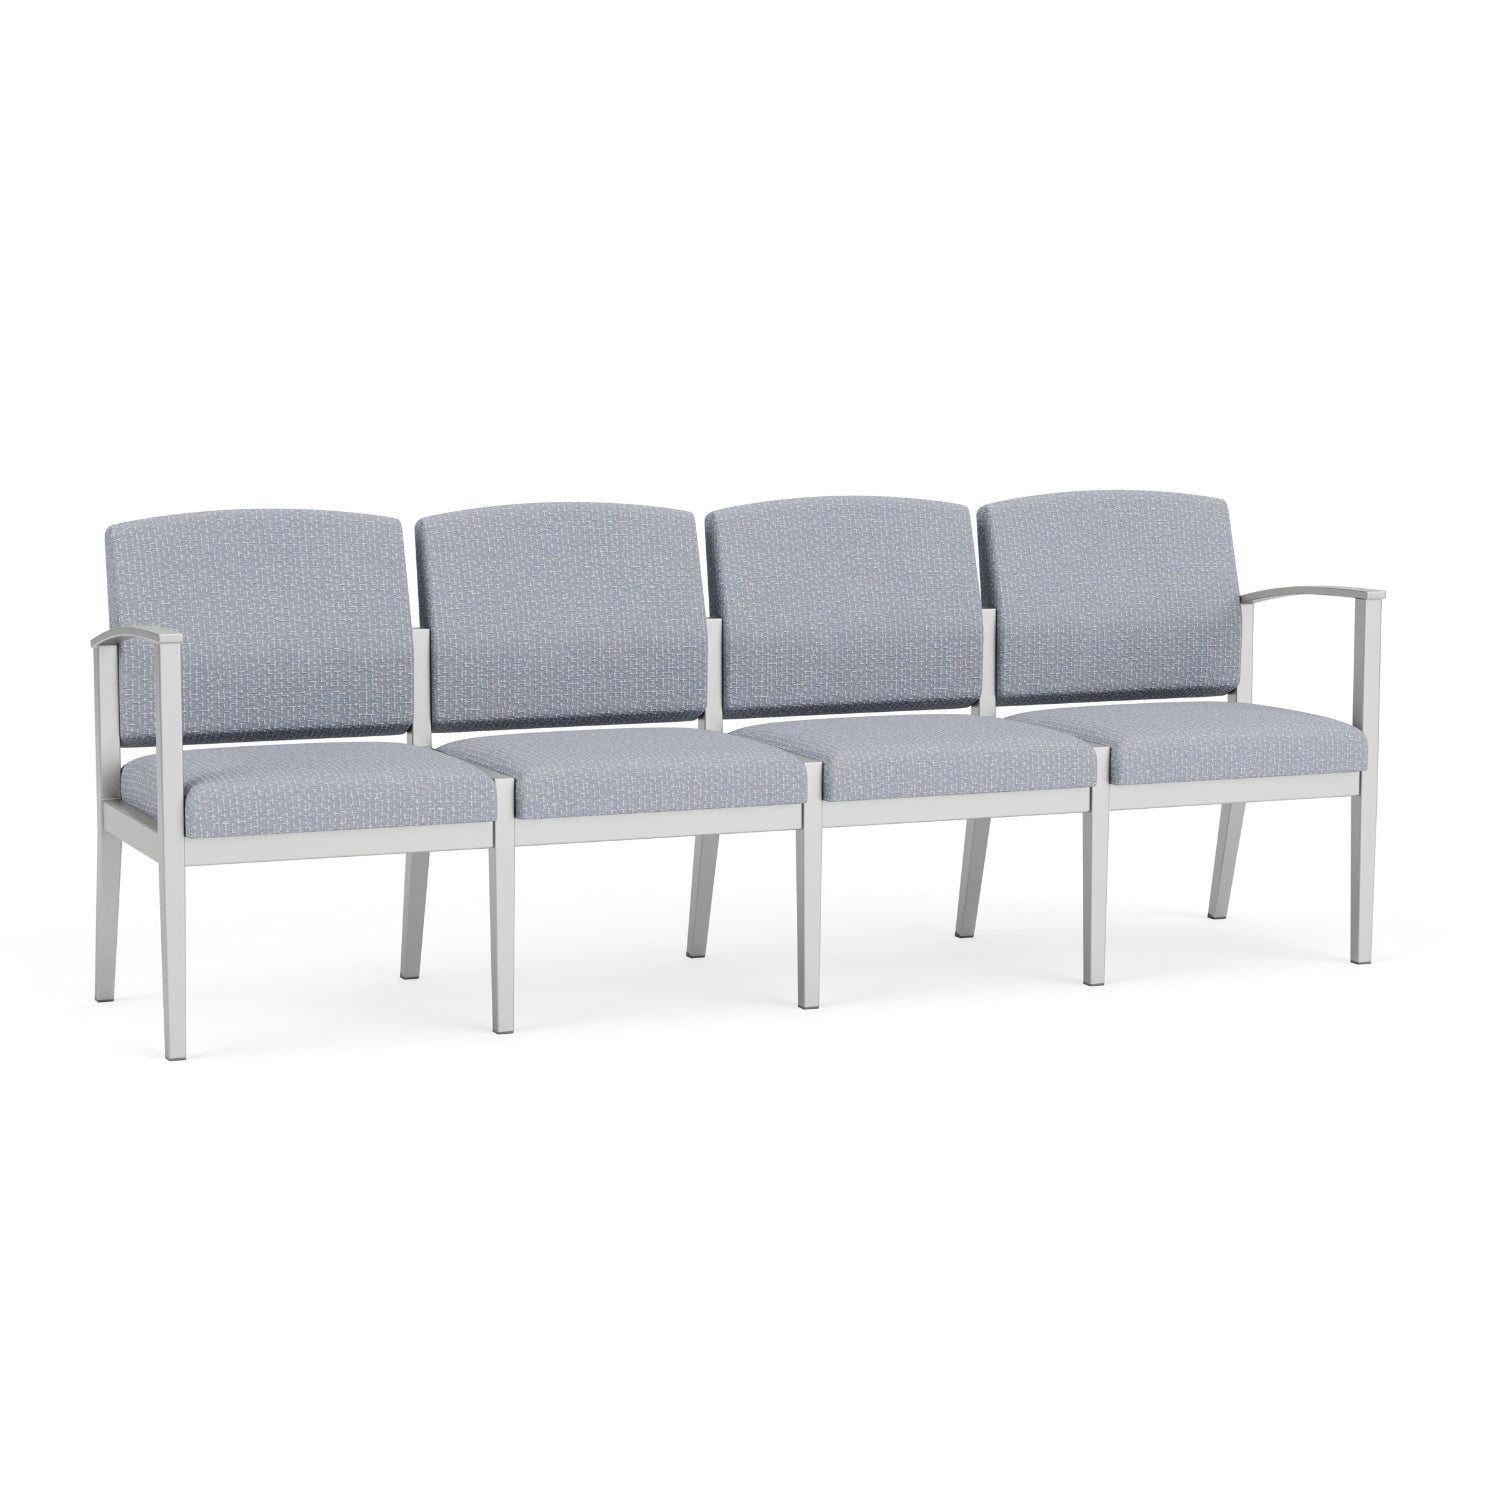 Amherst Steel Collection Reception Seating, 4-Seat Sofa, Designer Fabric Upholstery, FREE SHIPPING